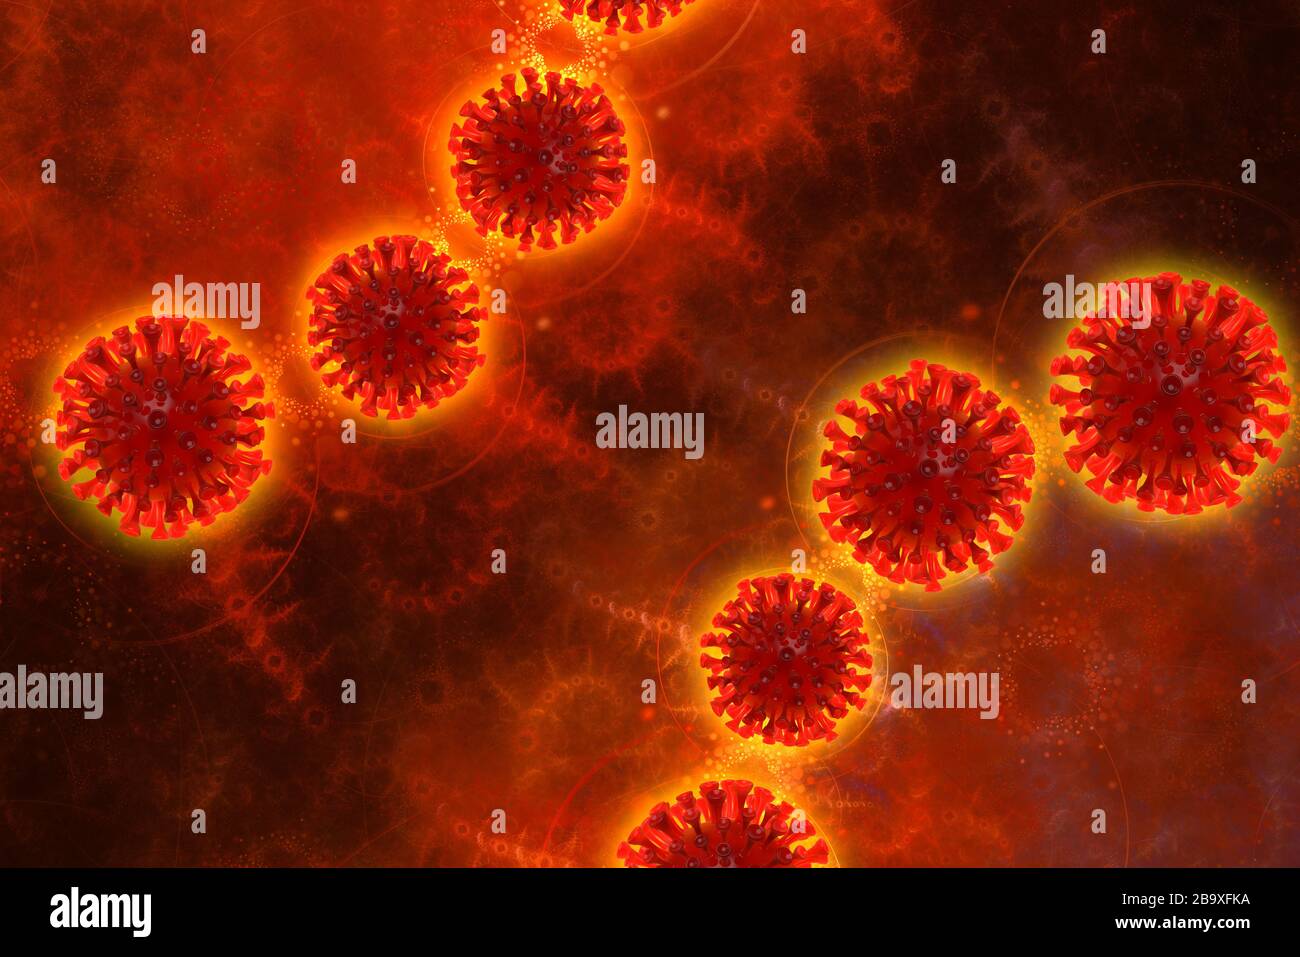 Coronavirus Wuhan, China COVID-19 background with corona cells molecules around. Epidemic condition 3d illustration on red background with copyspace Stock Photo